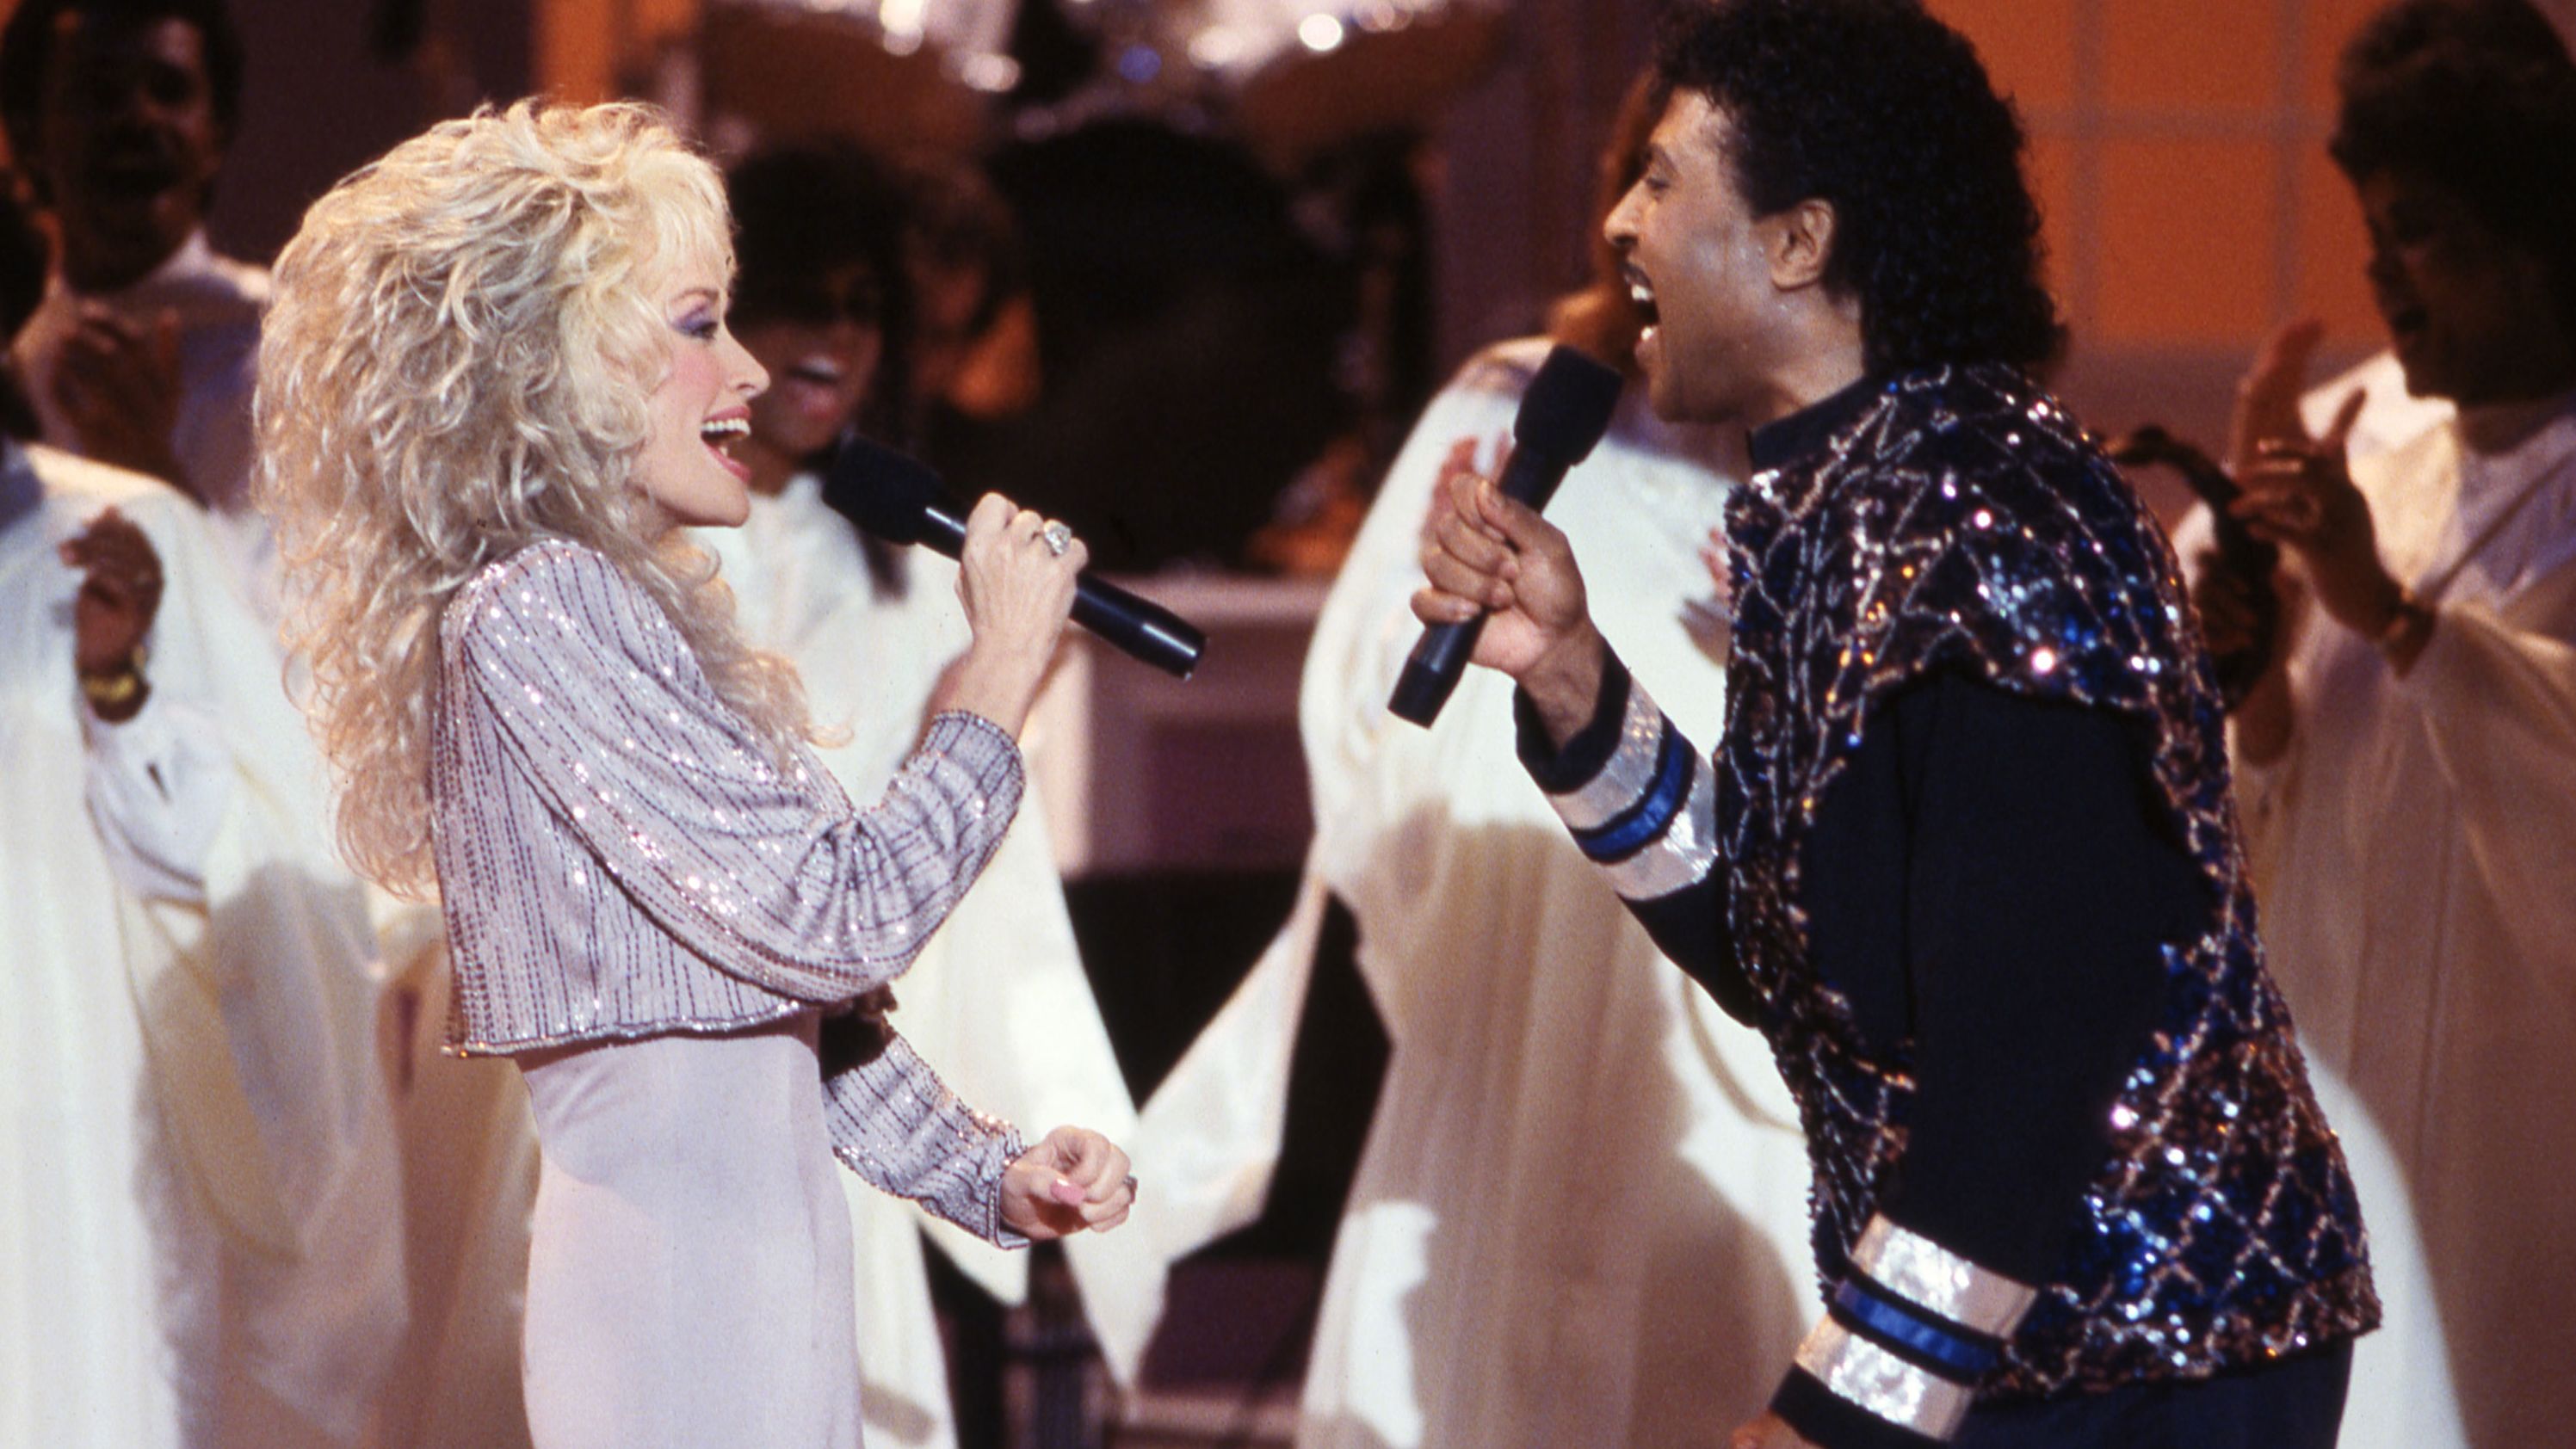 Dolly Parton and Little Richard perform on "Dolly" in 1987.